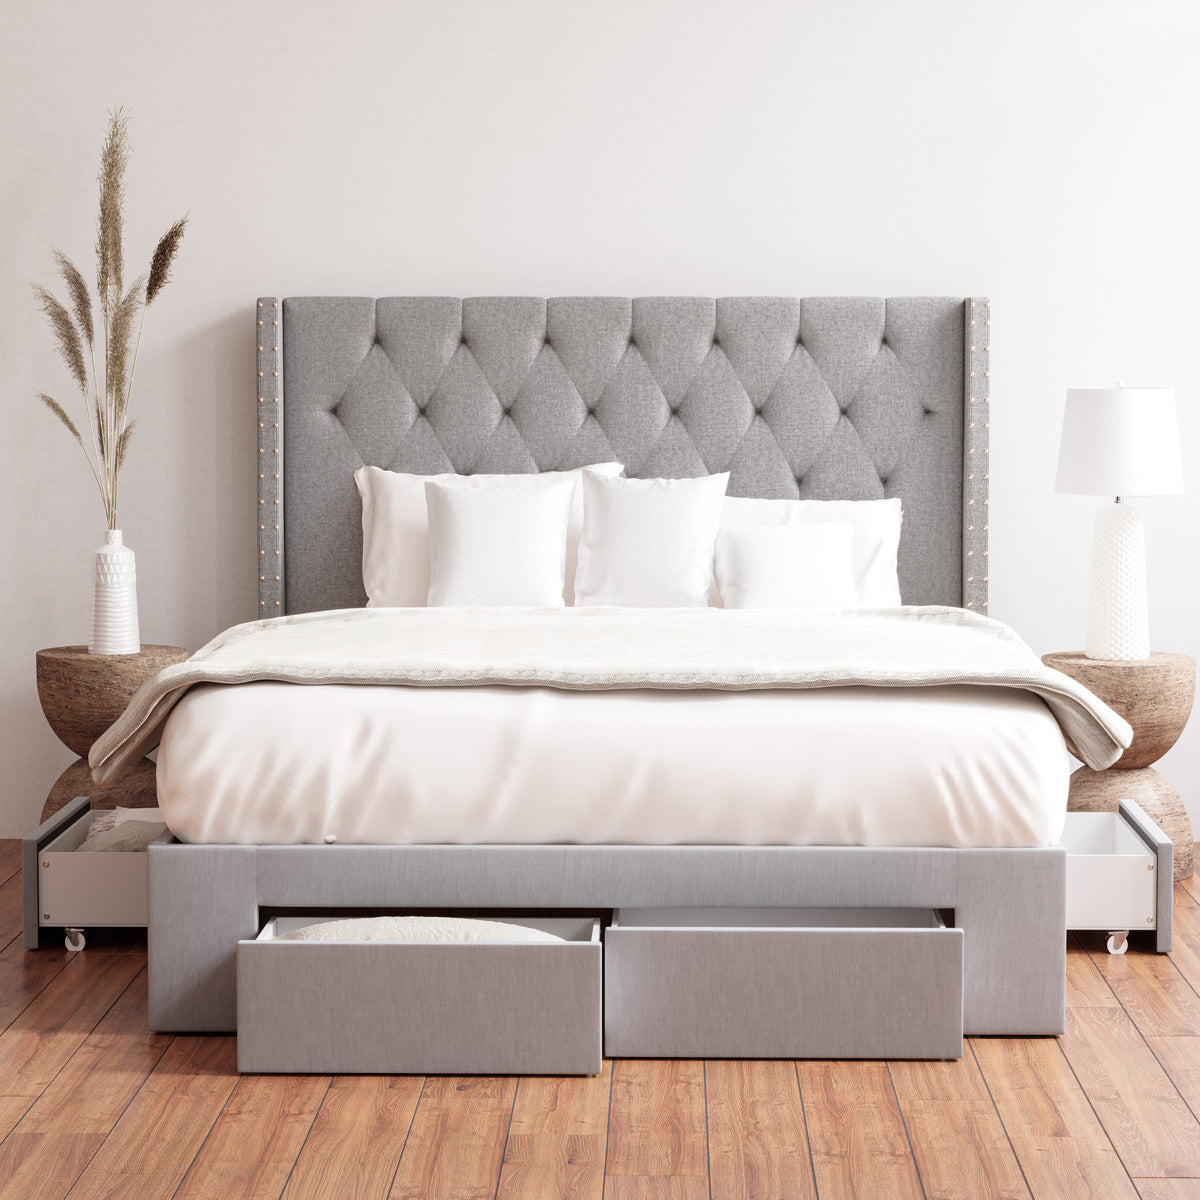 Grey Leonora Storage Bed Frame with Aspen Bedside Tables Package